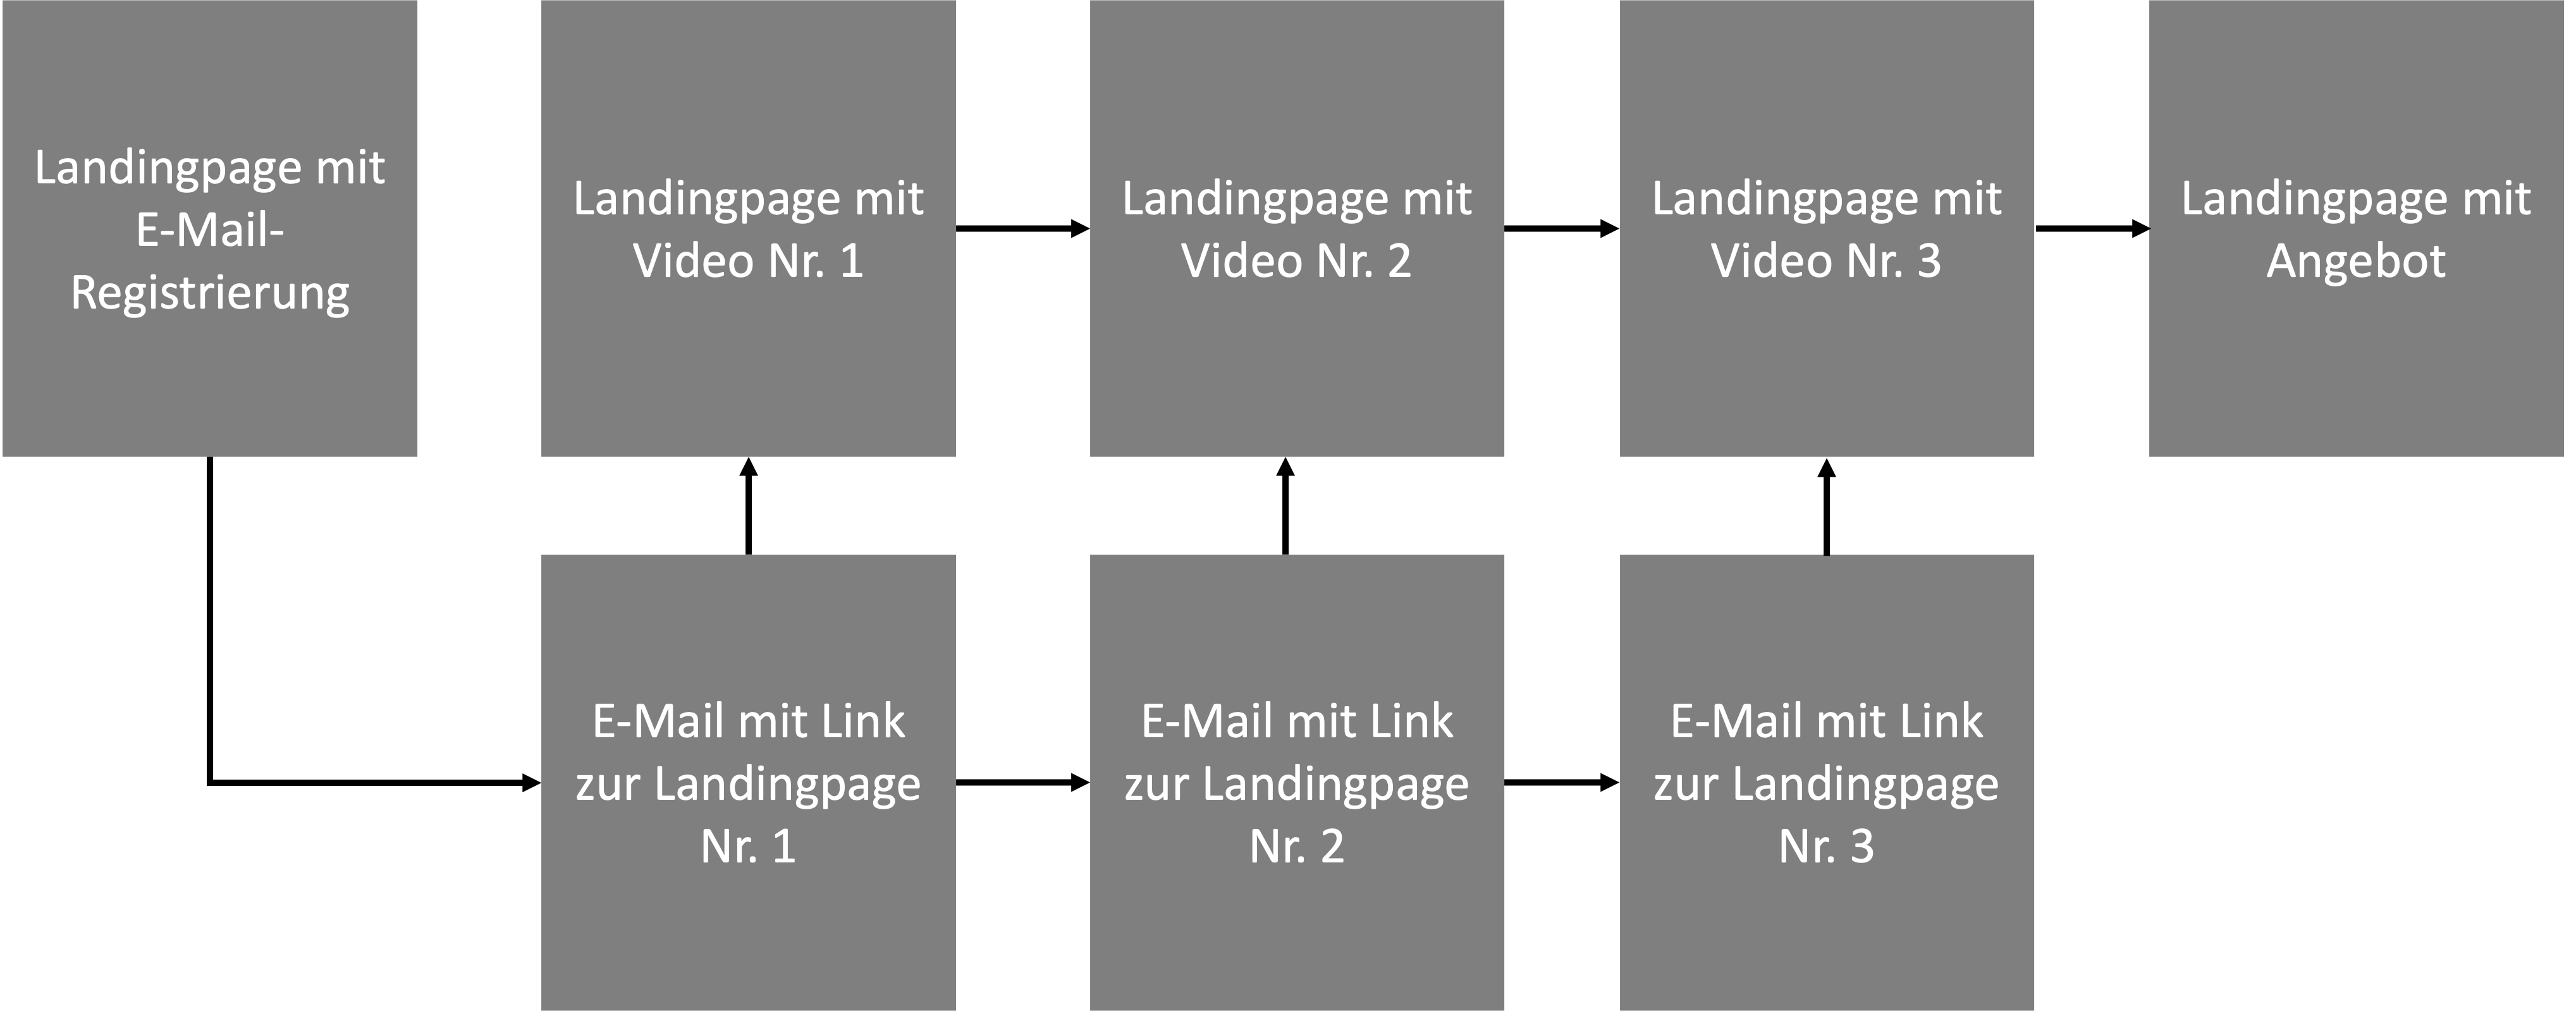 BILD PRODUCT-LAUNCH-FUNNEL.png